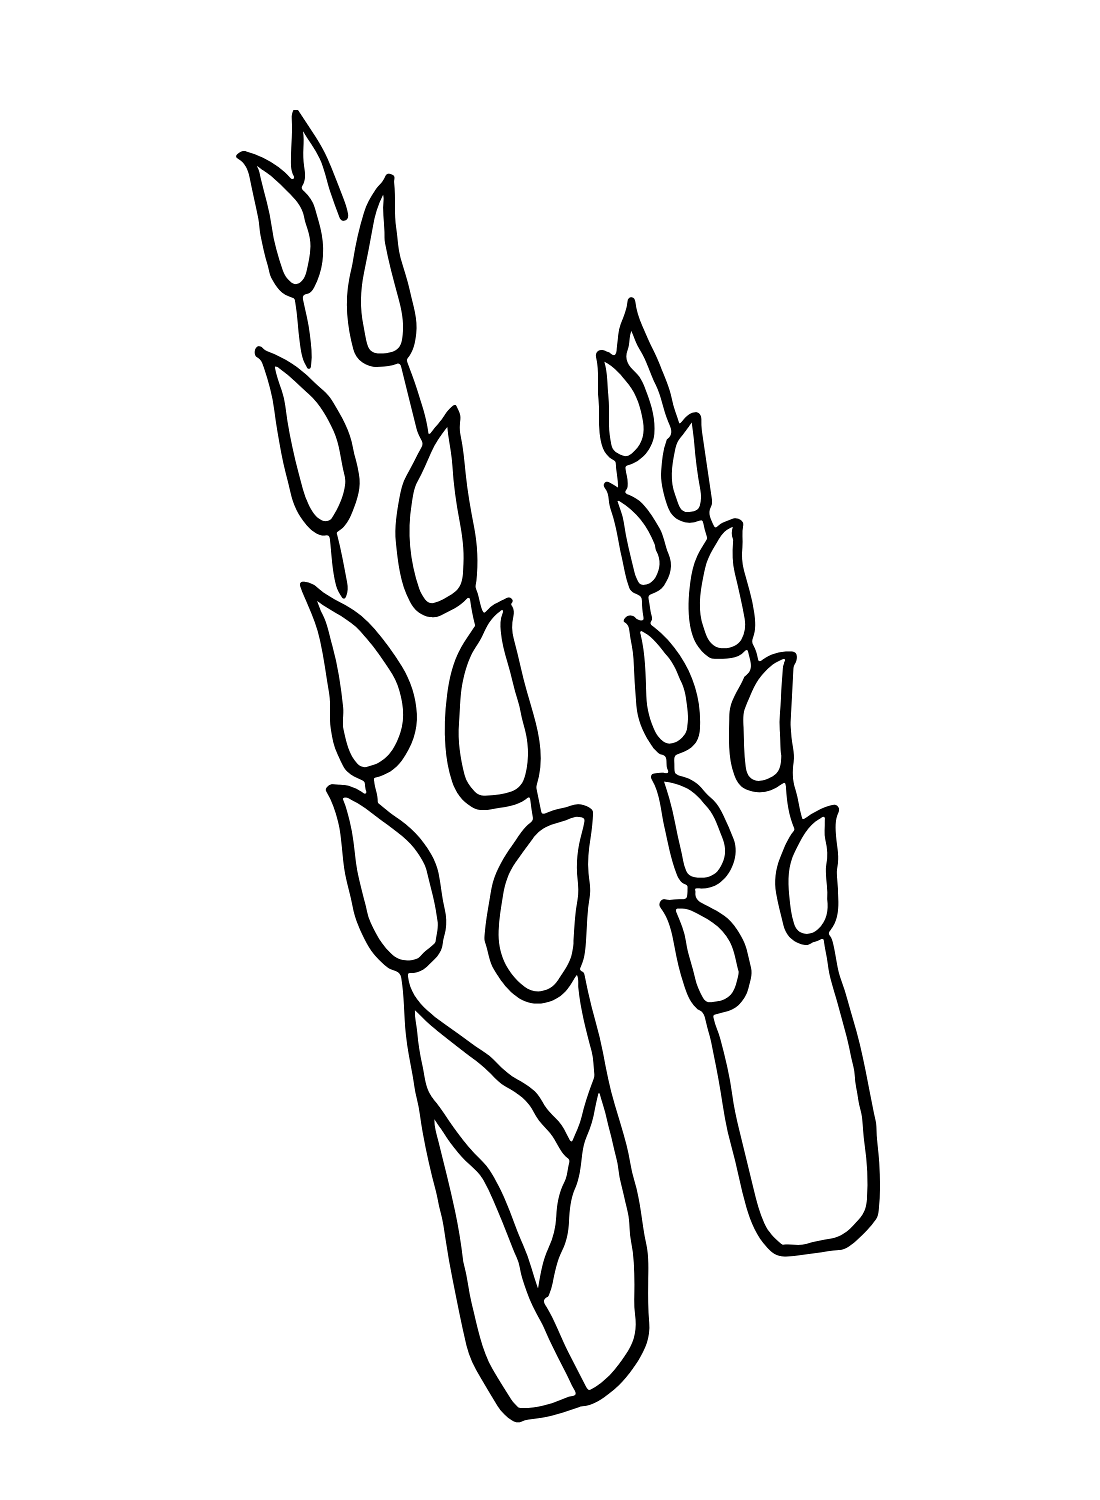 Asparagus Free Coloring Page